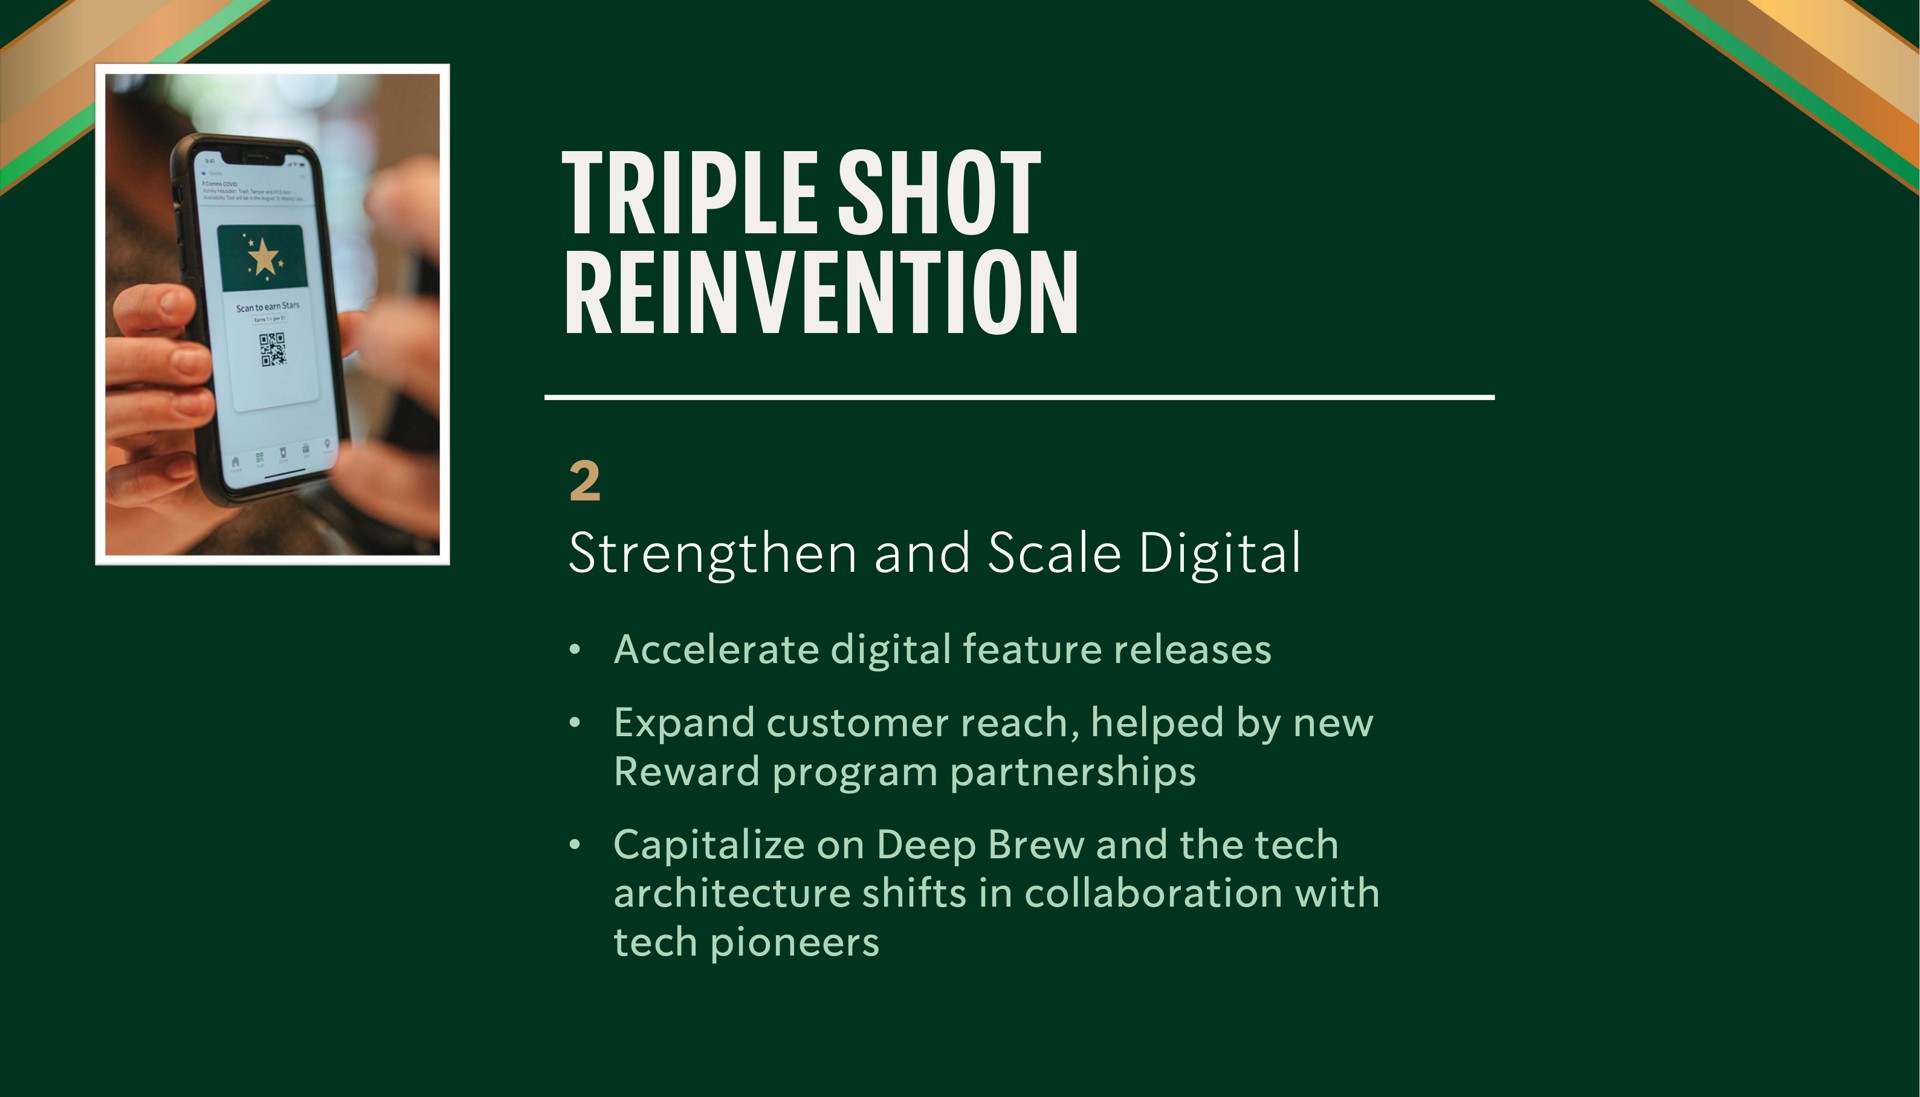 triple shot reinvention strengthen and scale digital | Starbucks